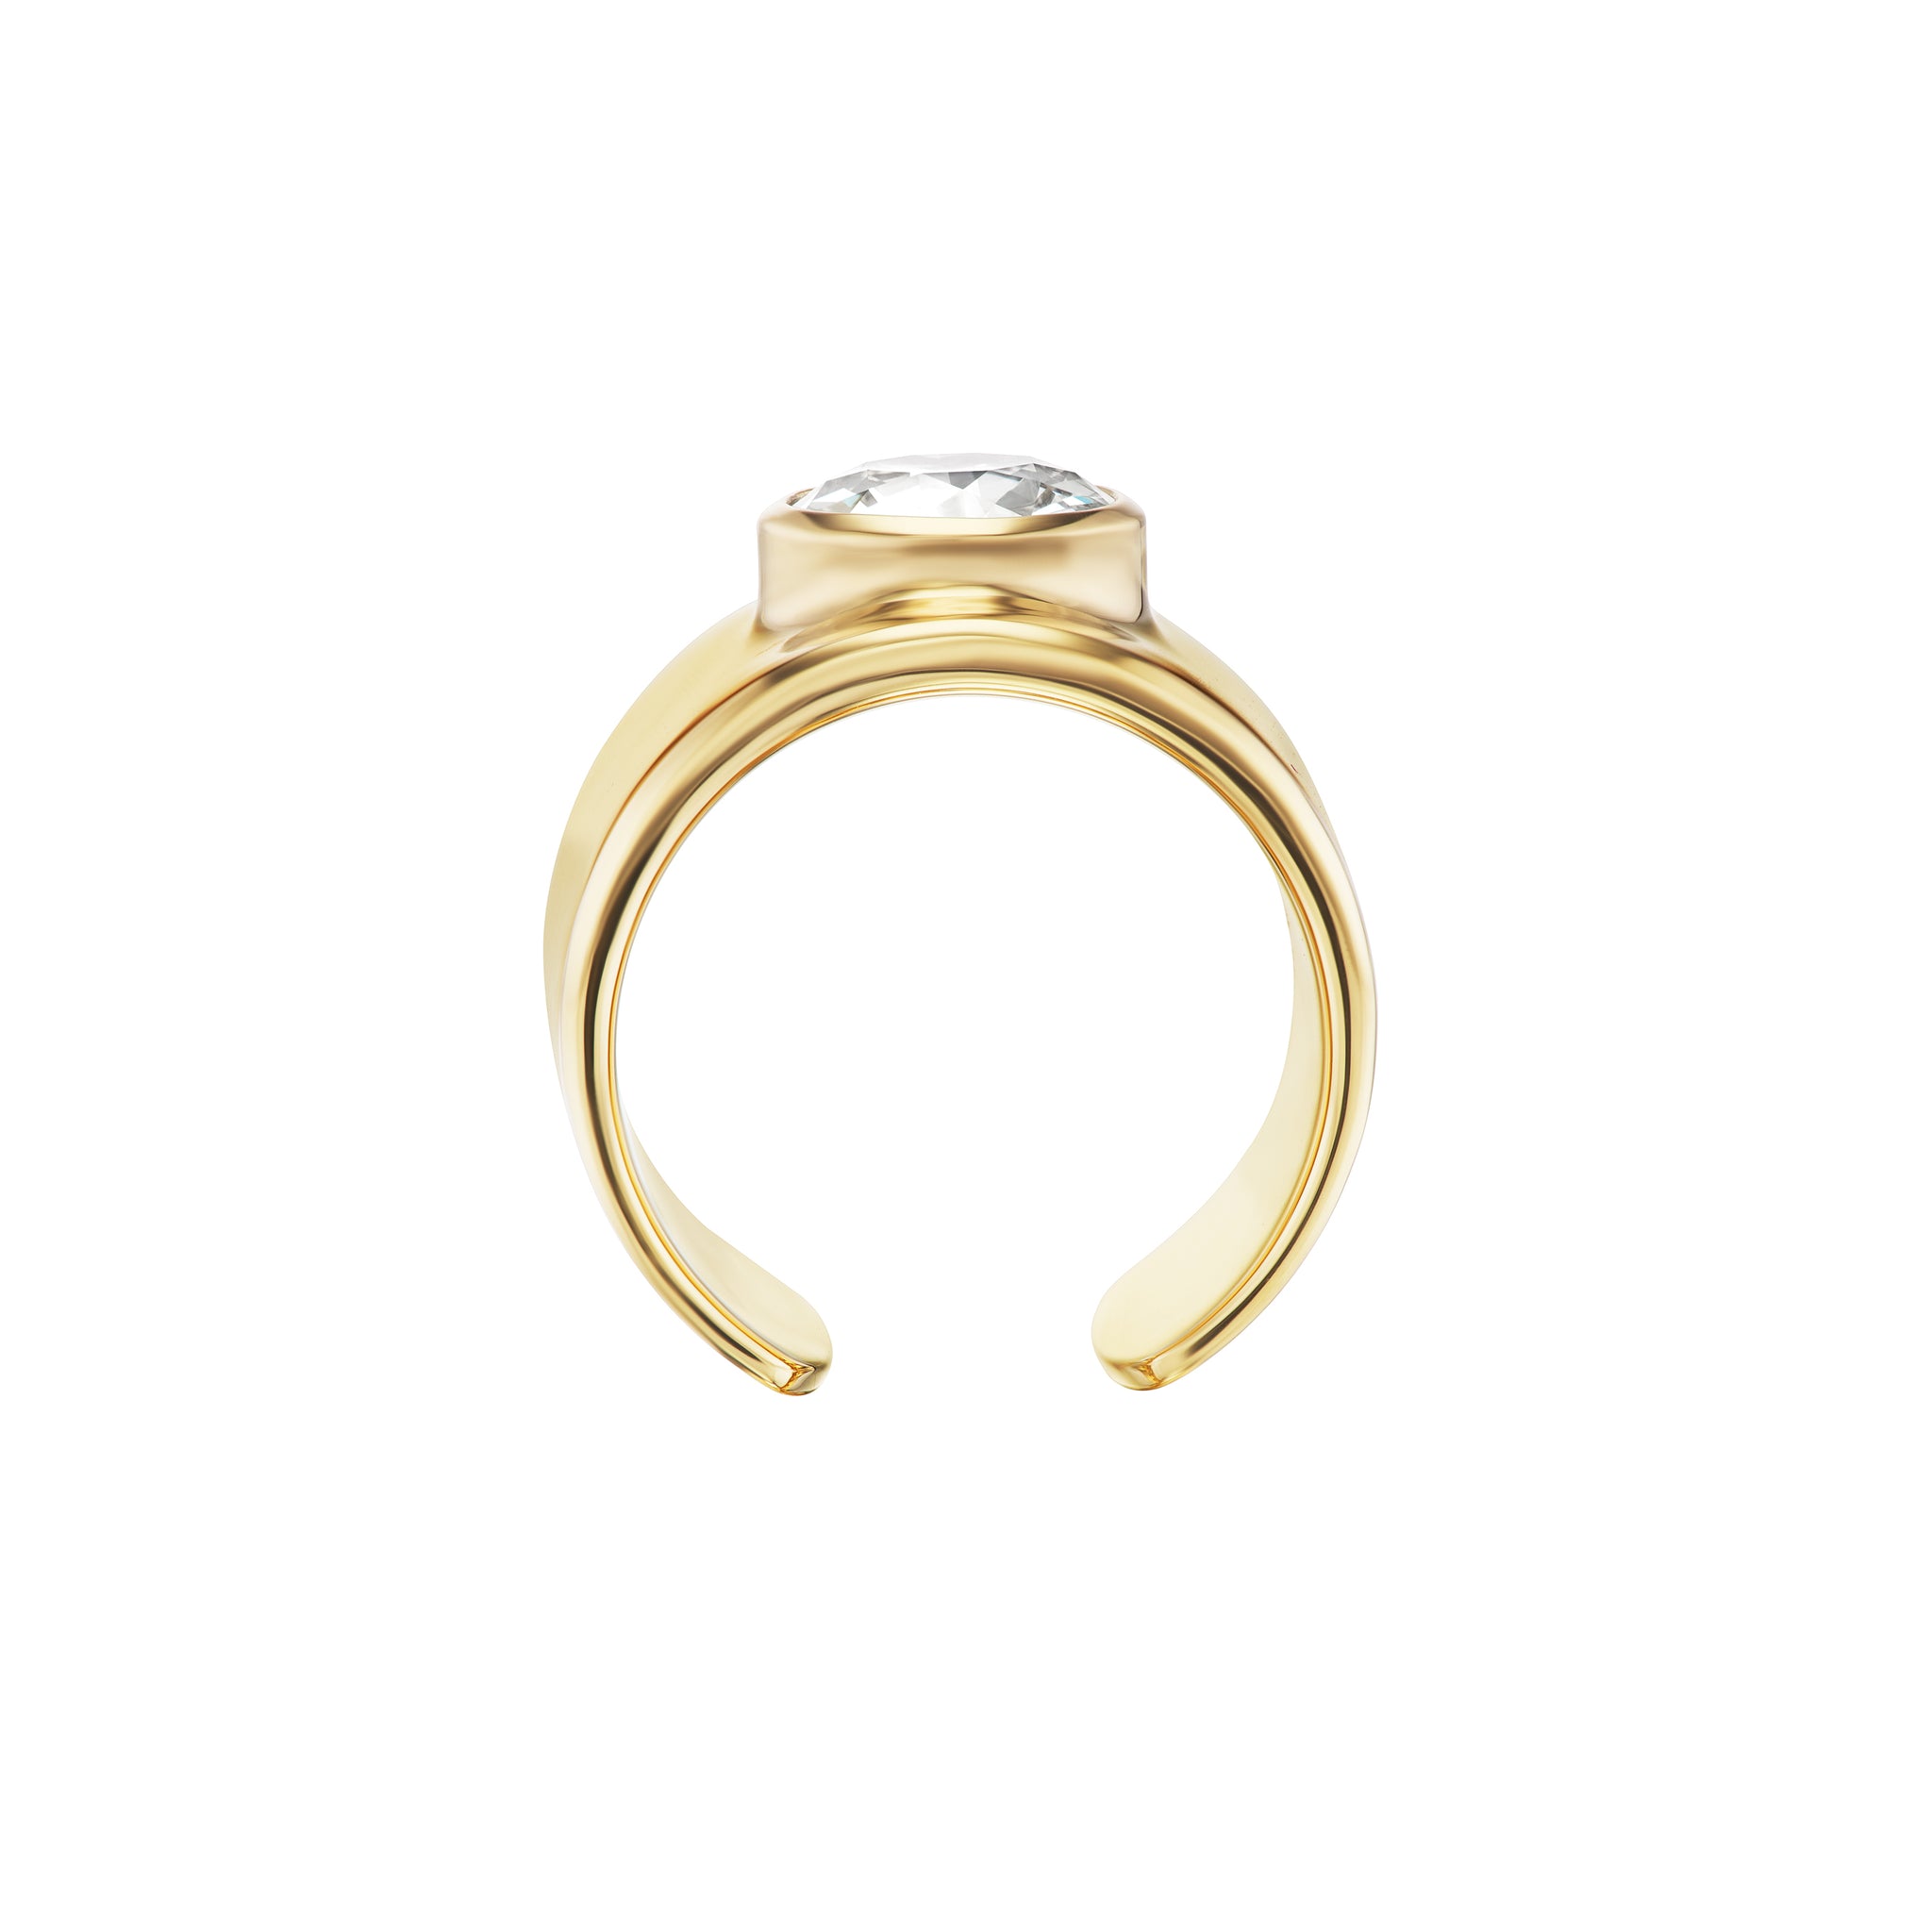 15MM SOLITAIRE CUFF RING